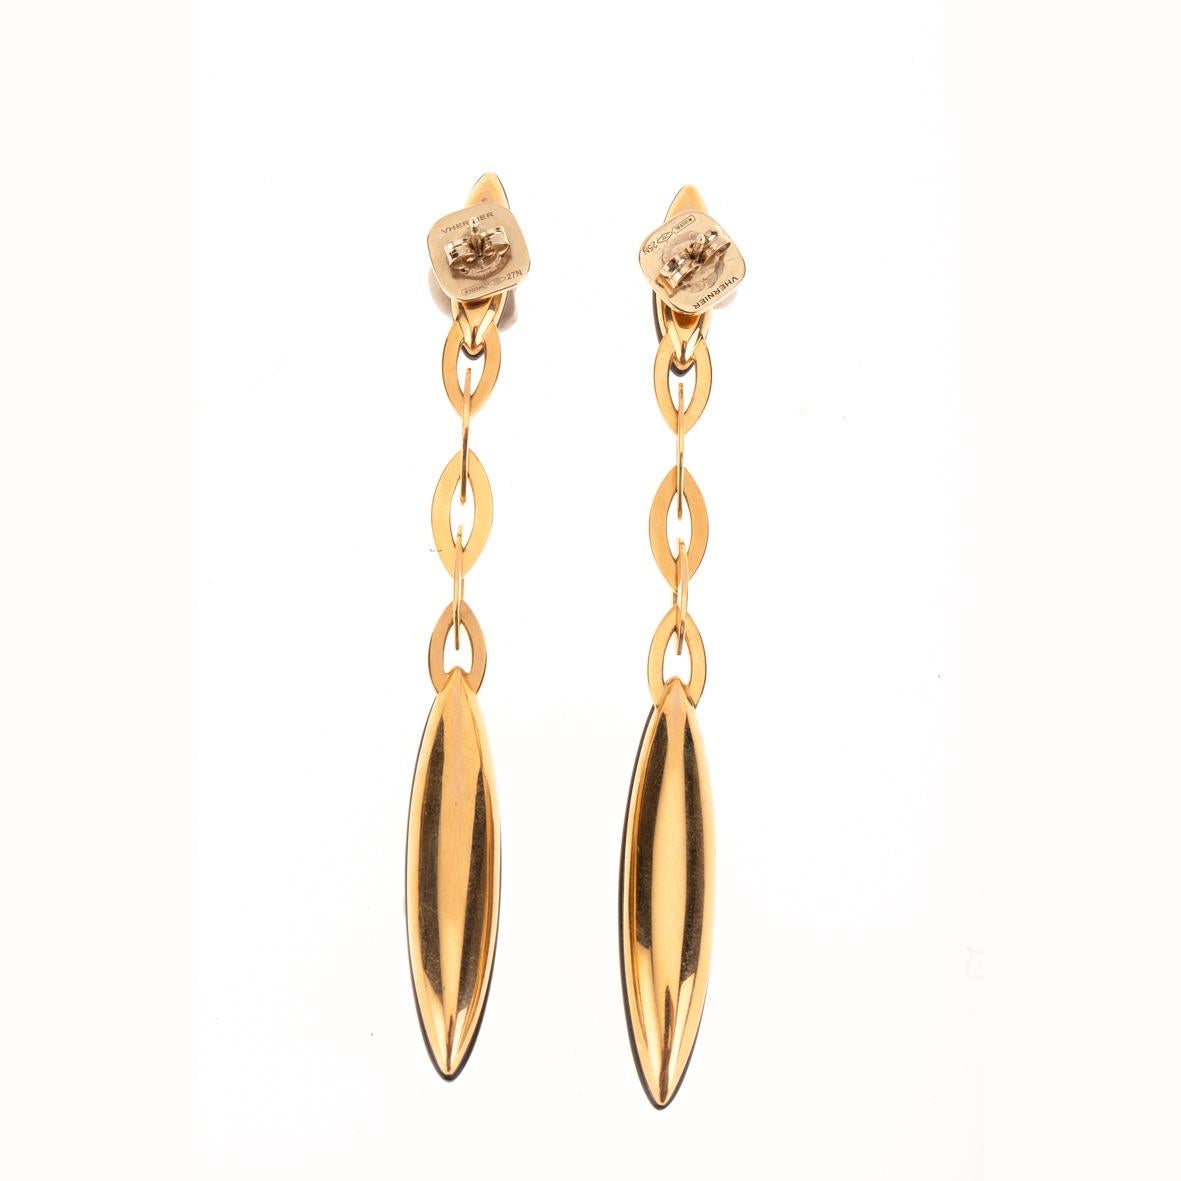 The fuseau earrings combine classic rose gold with the vernier classic trasparencies create with layers of fume quartz   mother of pearls and rock crystal.inspired  by the elegant shape of a spindle they move and dance thanks to the refine links